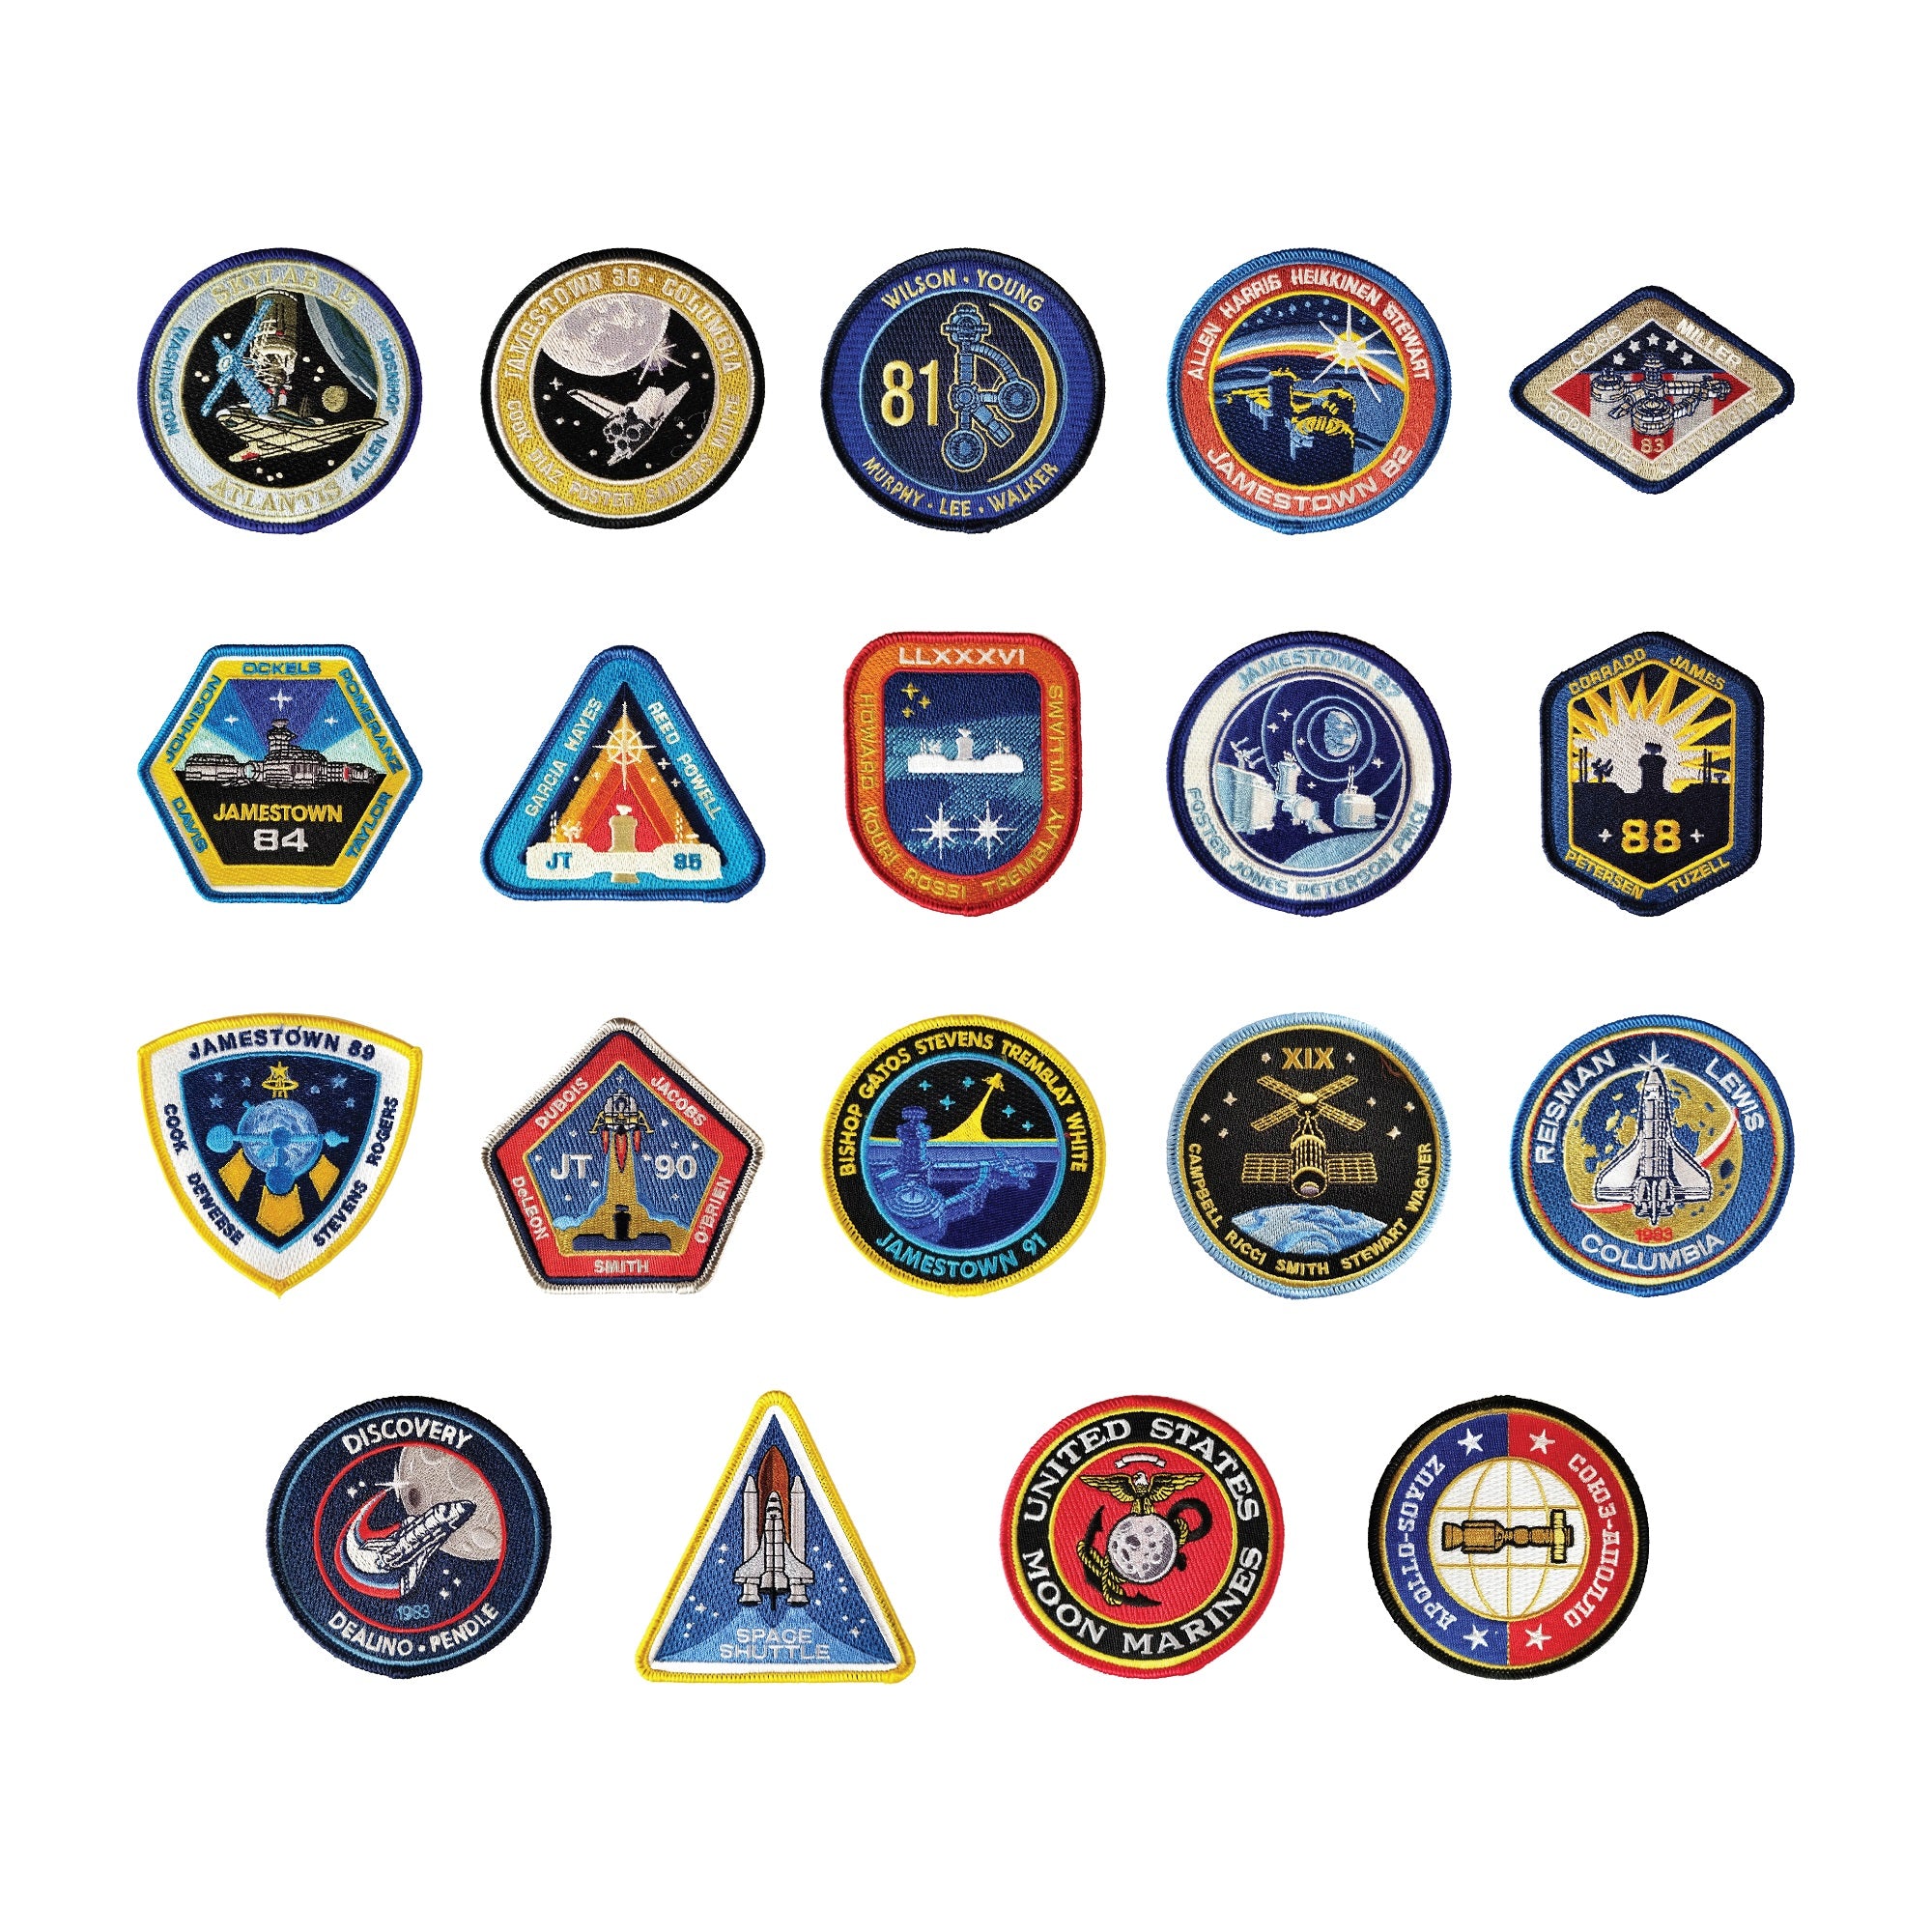 8 Patches in 1 Set (series 2) Medium Patches